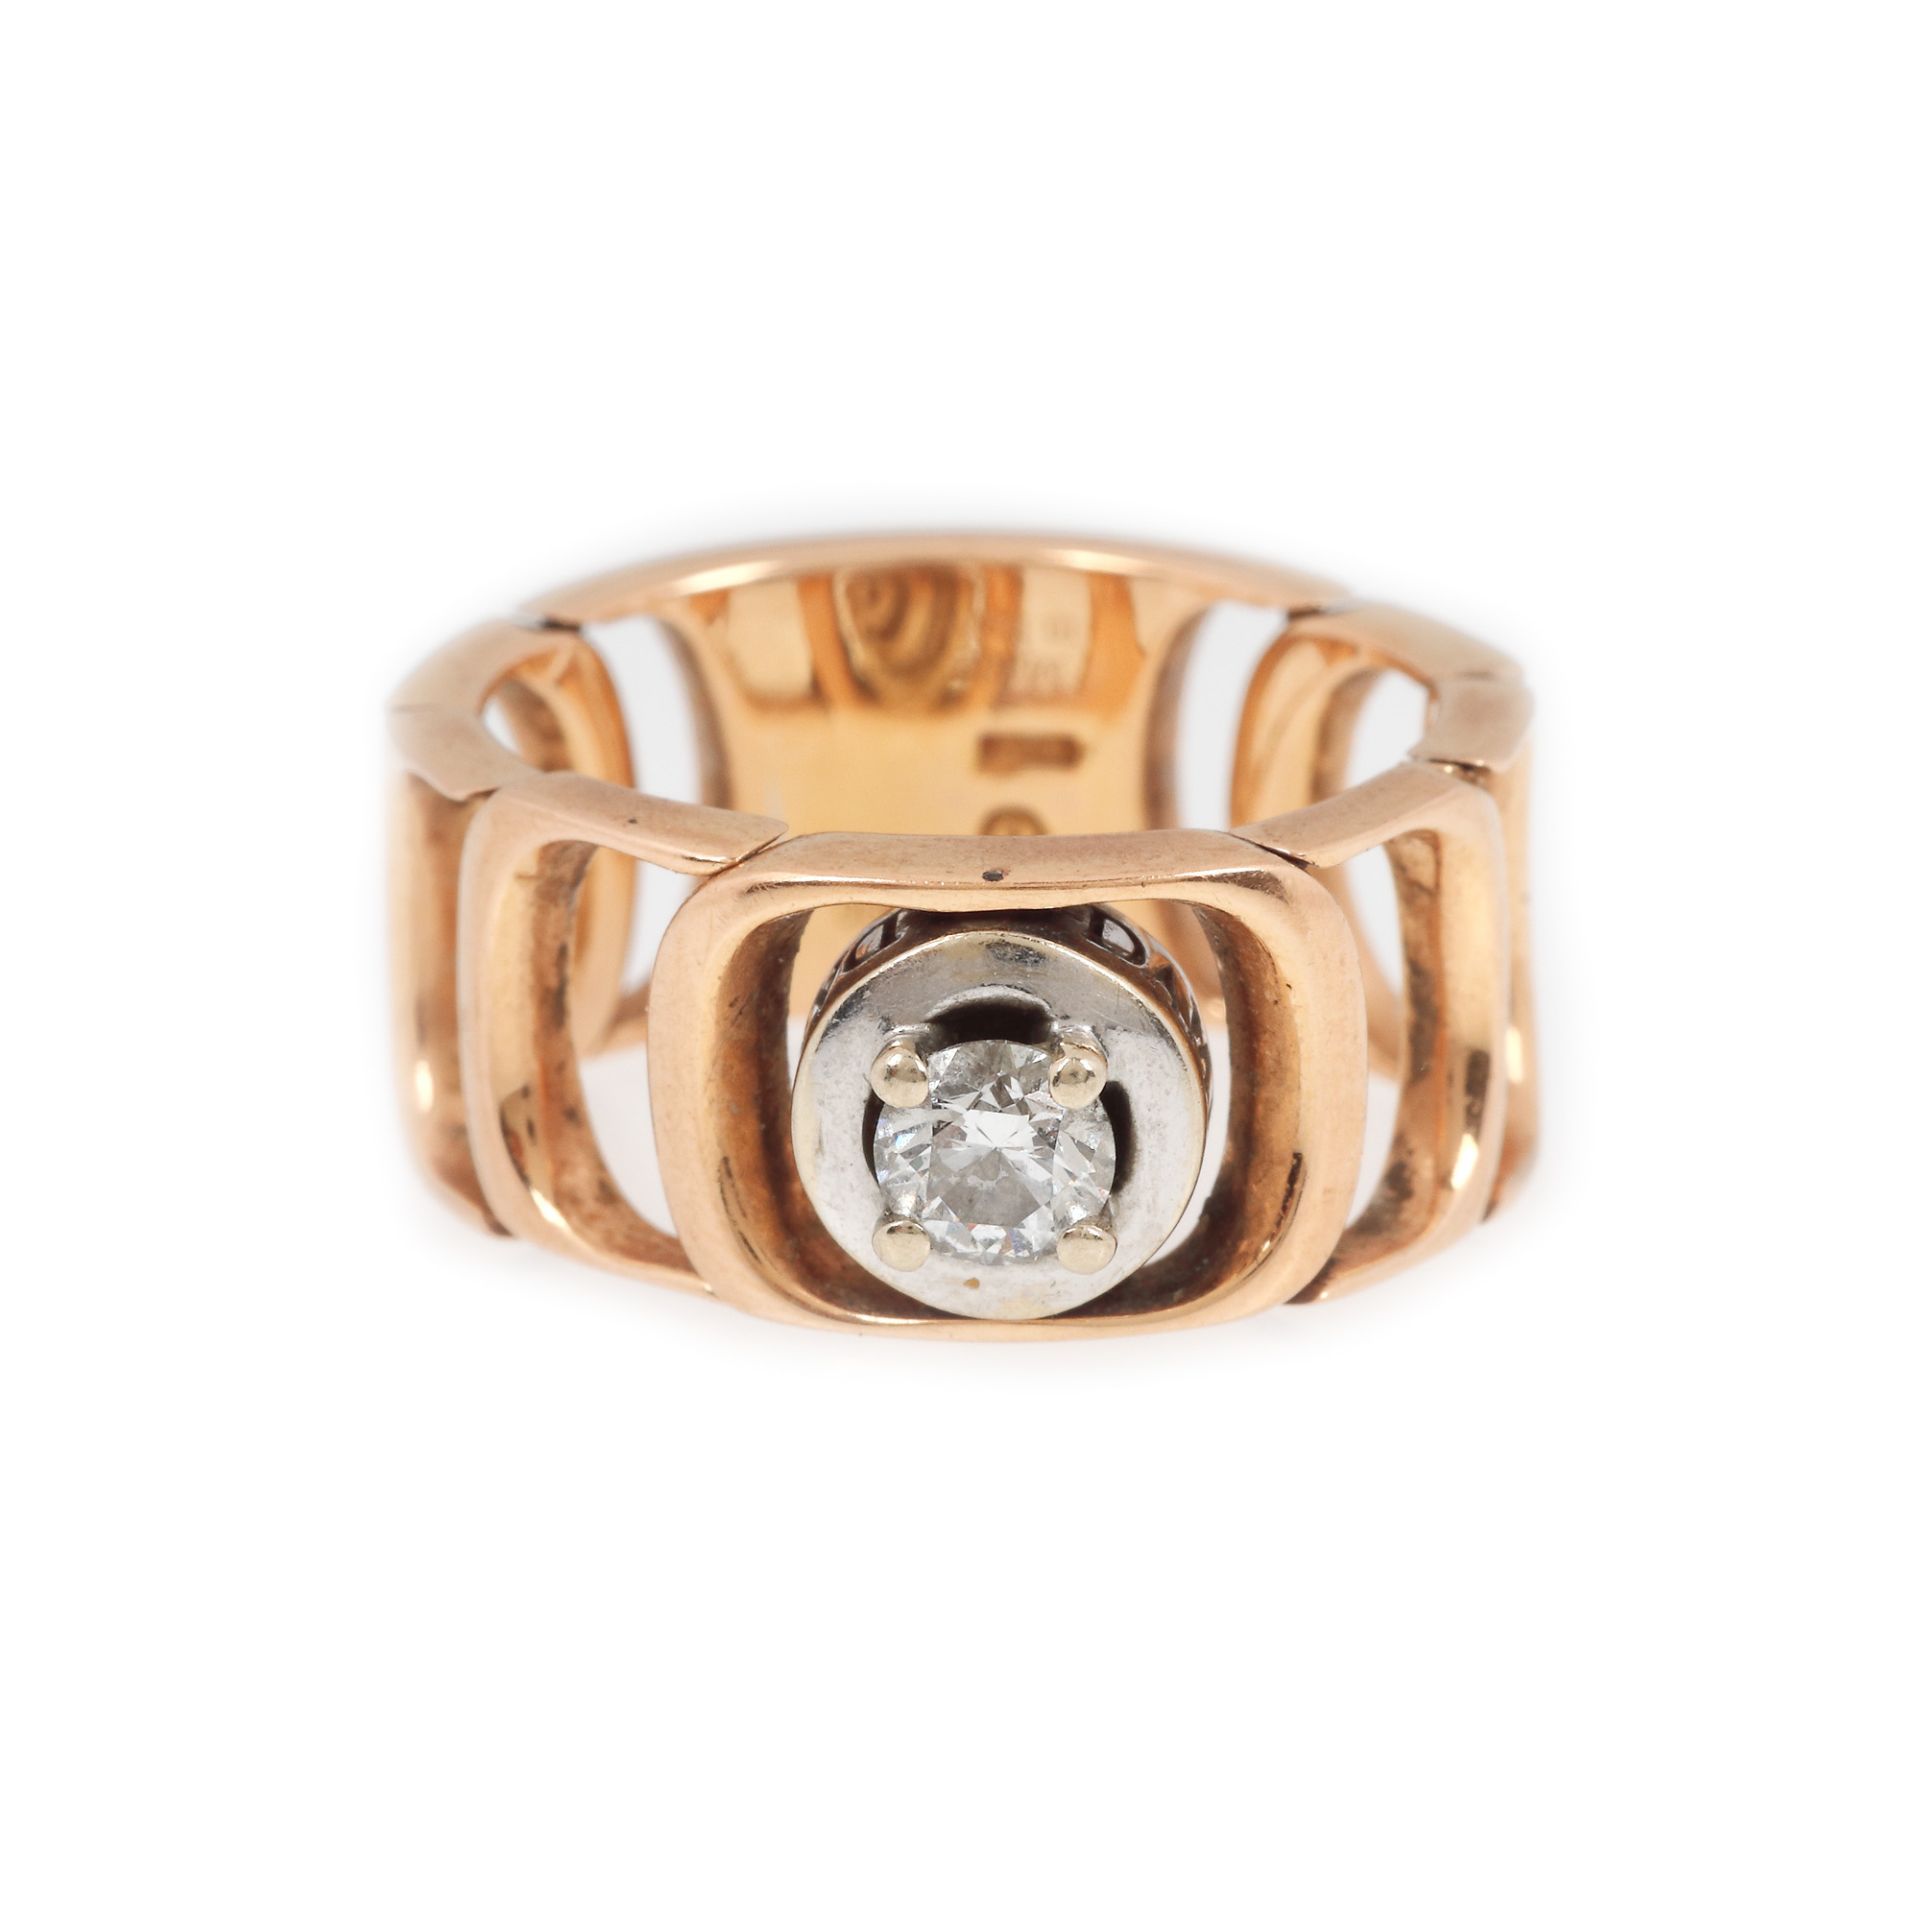 Damiani set, white and rose gold, decorated with diamonds - Image 4 of 5